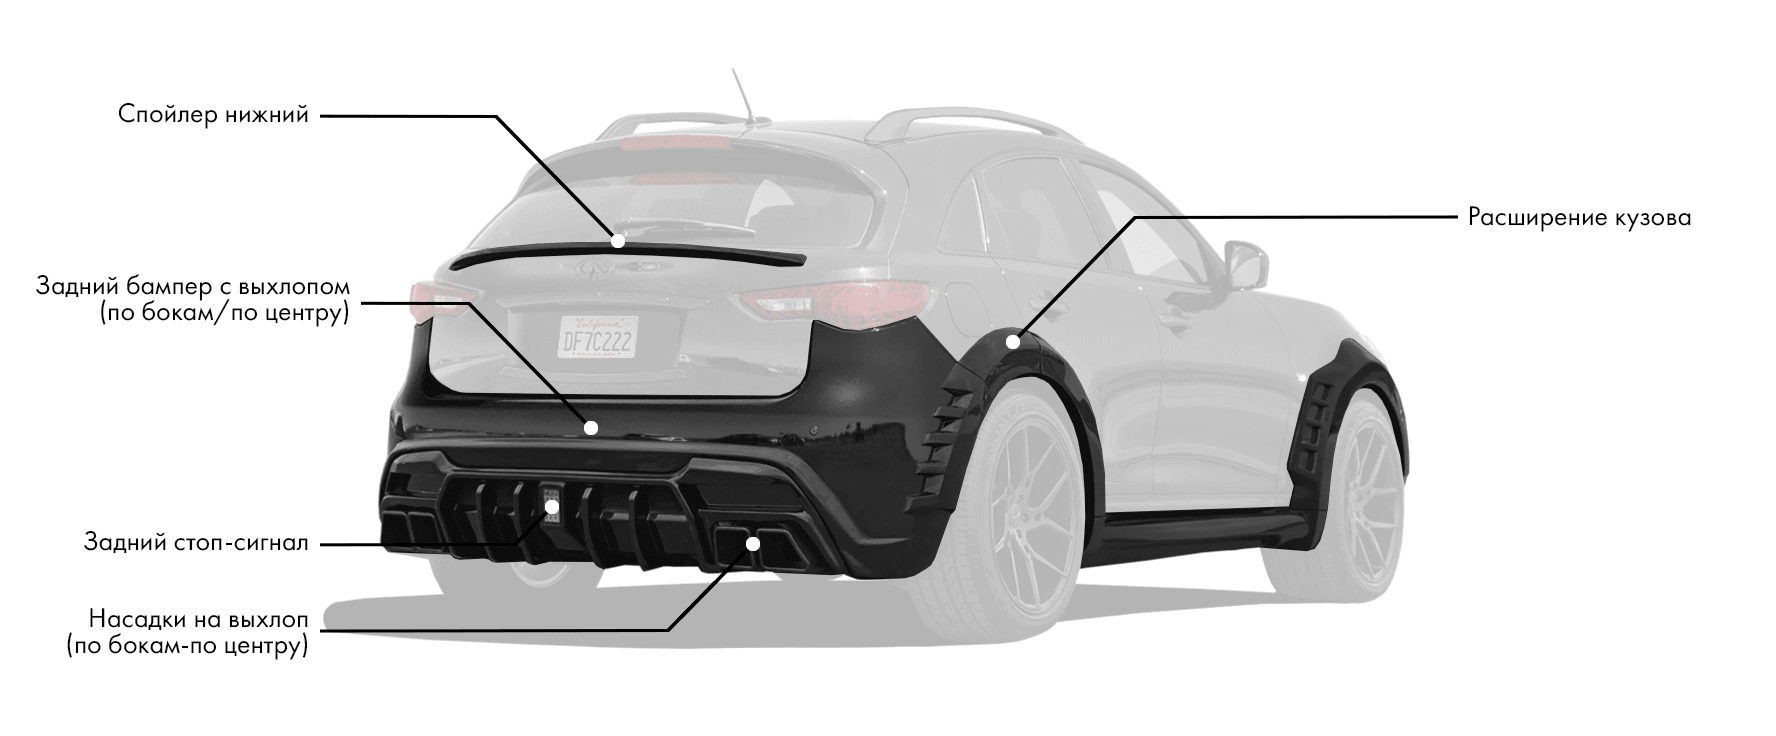 Check price and buy Renegade Design wide body kit for Infiniti QX70 FX S51